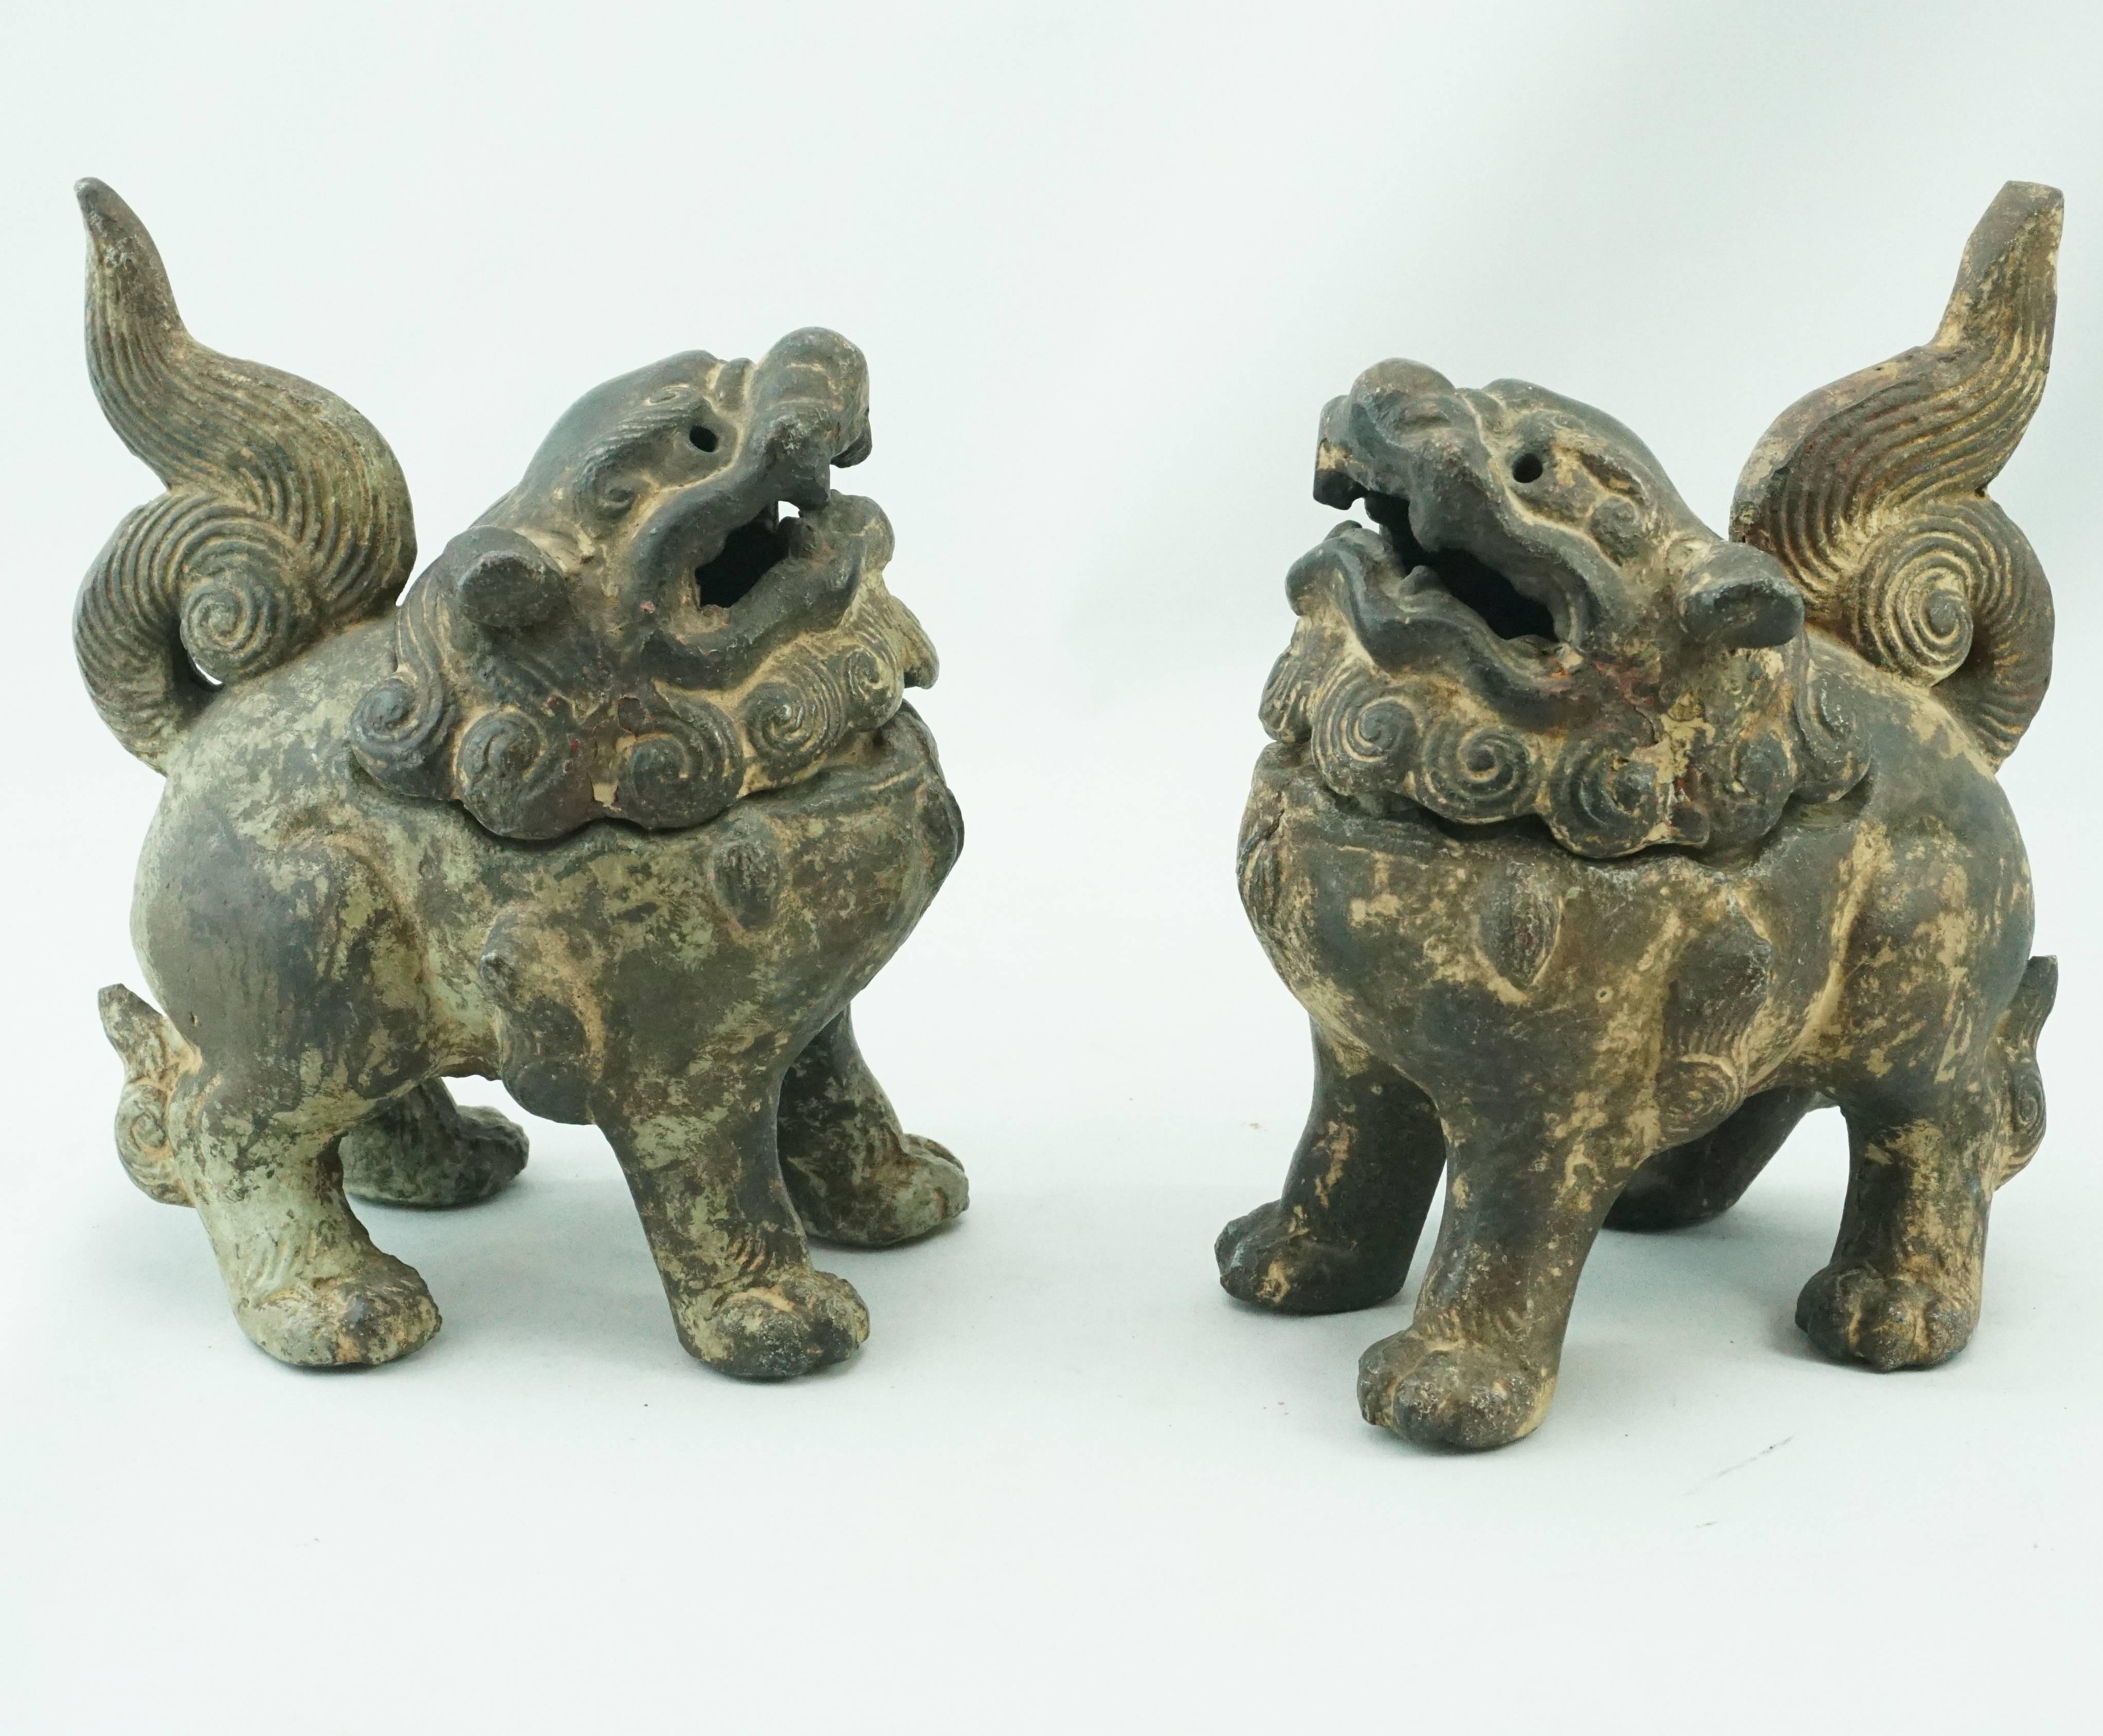 19th century Chinese cast iron foo dogs lions incense burners. Late Qing Dynasty. Whimsical packed with character iron incense burners for your personal temple, bedroom or living room. When operational; smoke pours out of the lions mouth and eyes